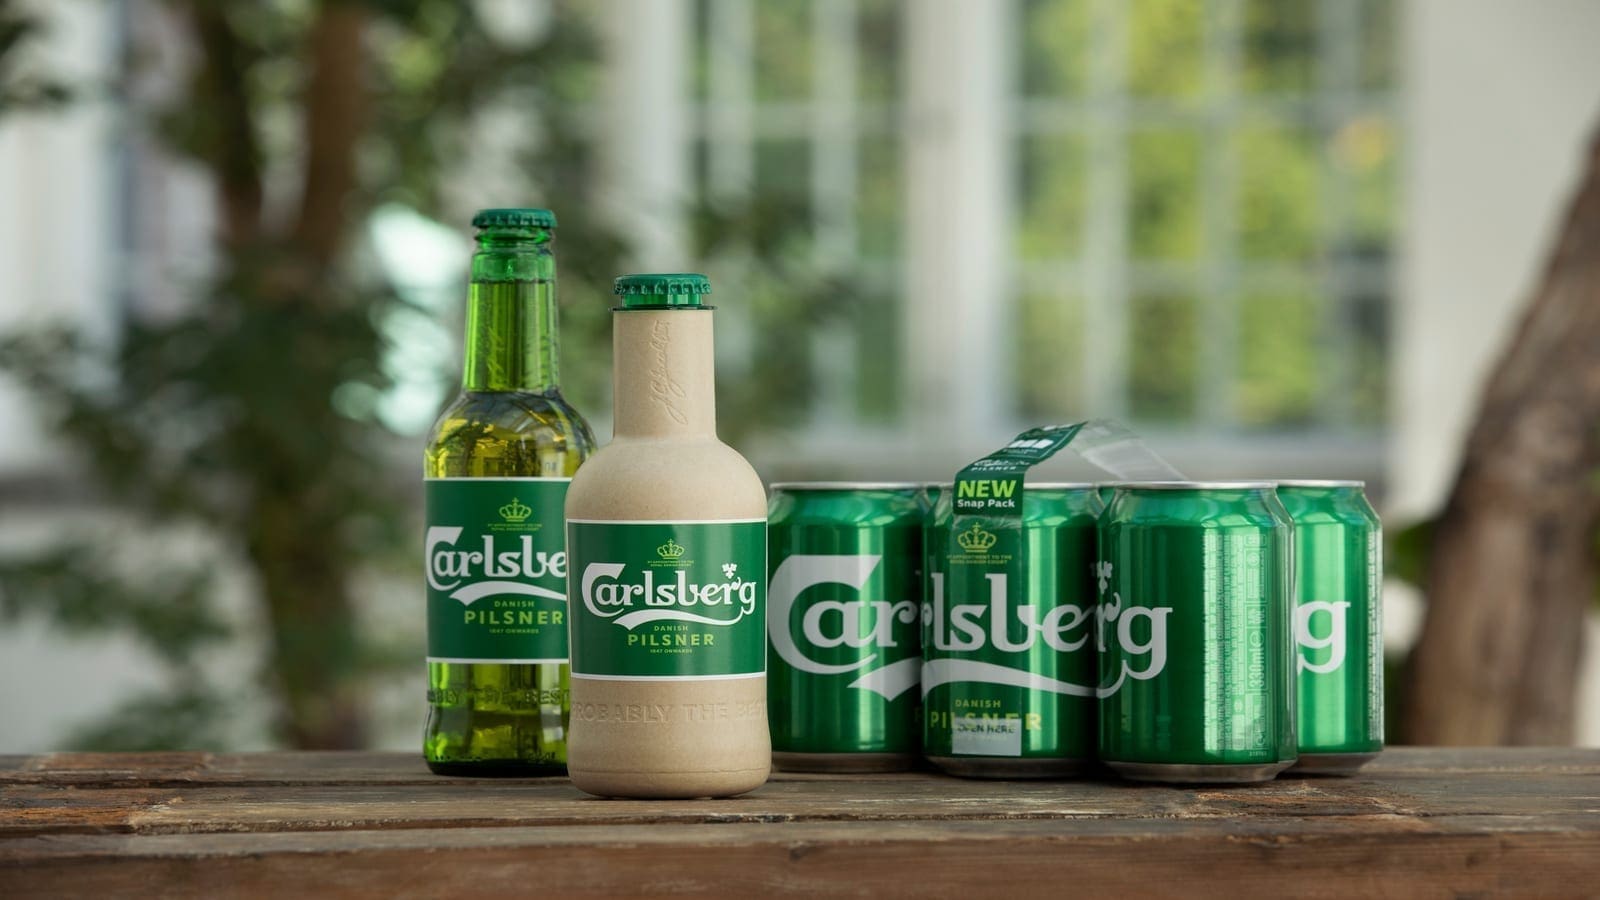 Carlsberg, Marston’s brewing US$1B merger given a go ahead by CMA